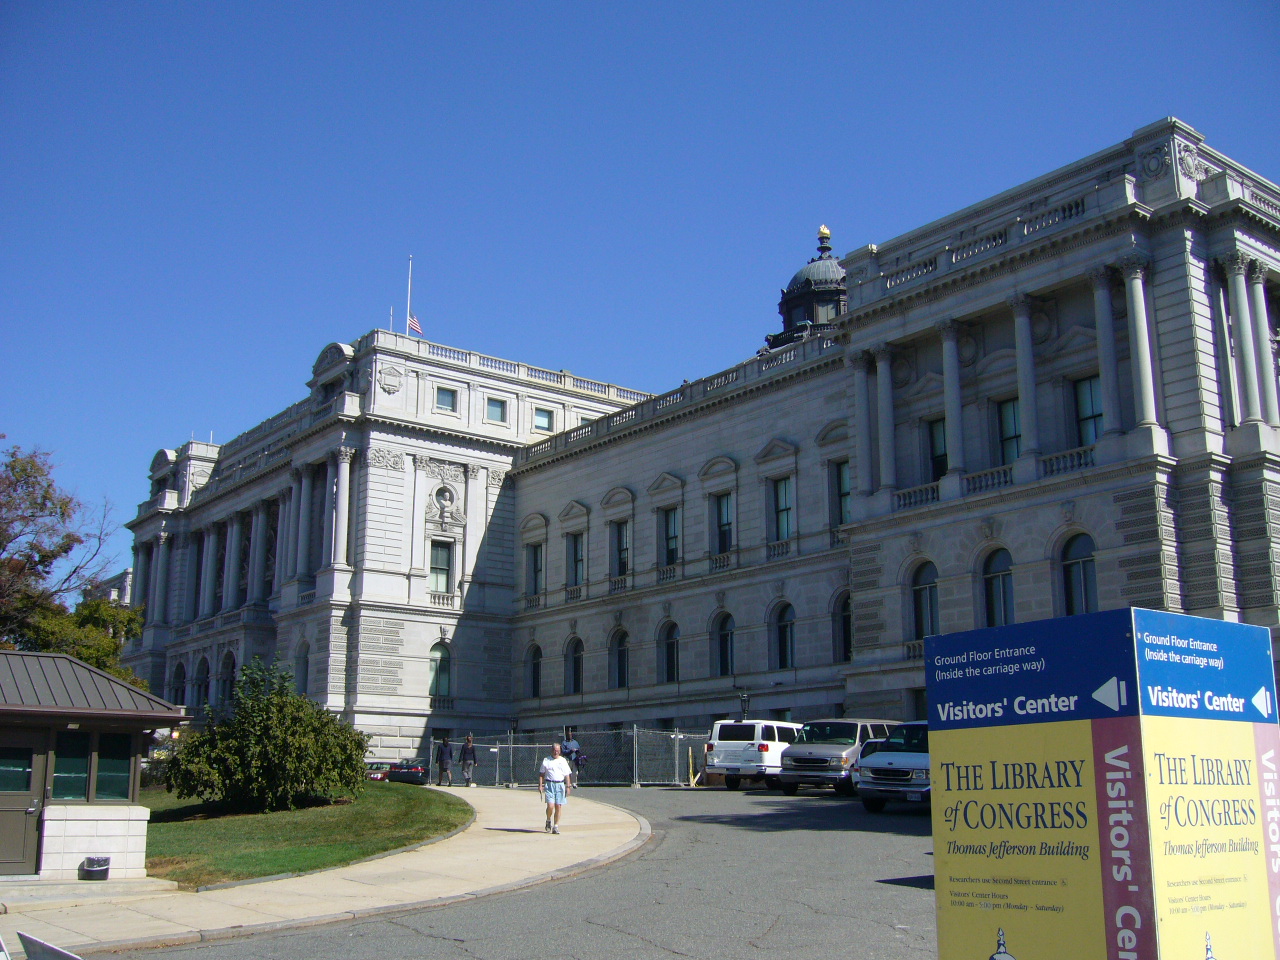 Jefferson Building, Library of Congress